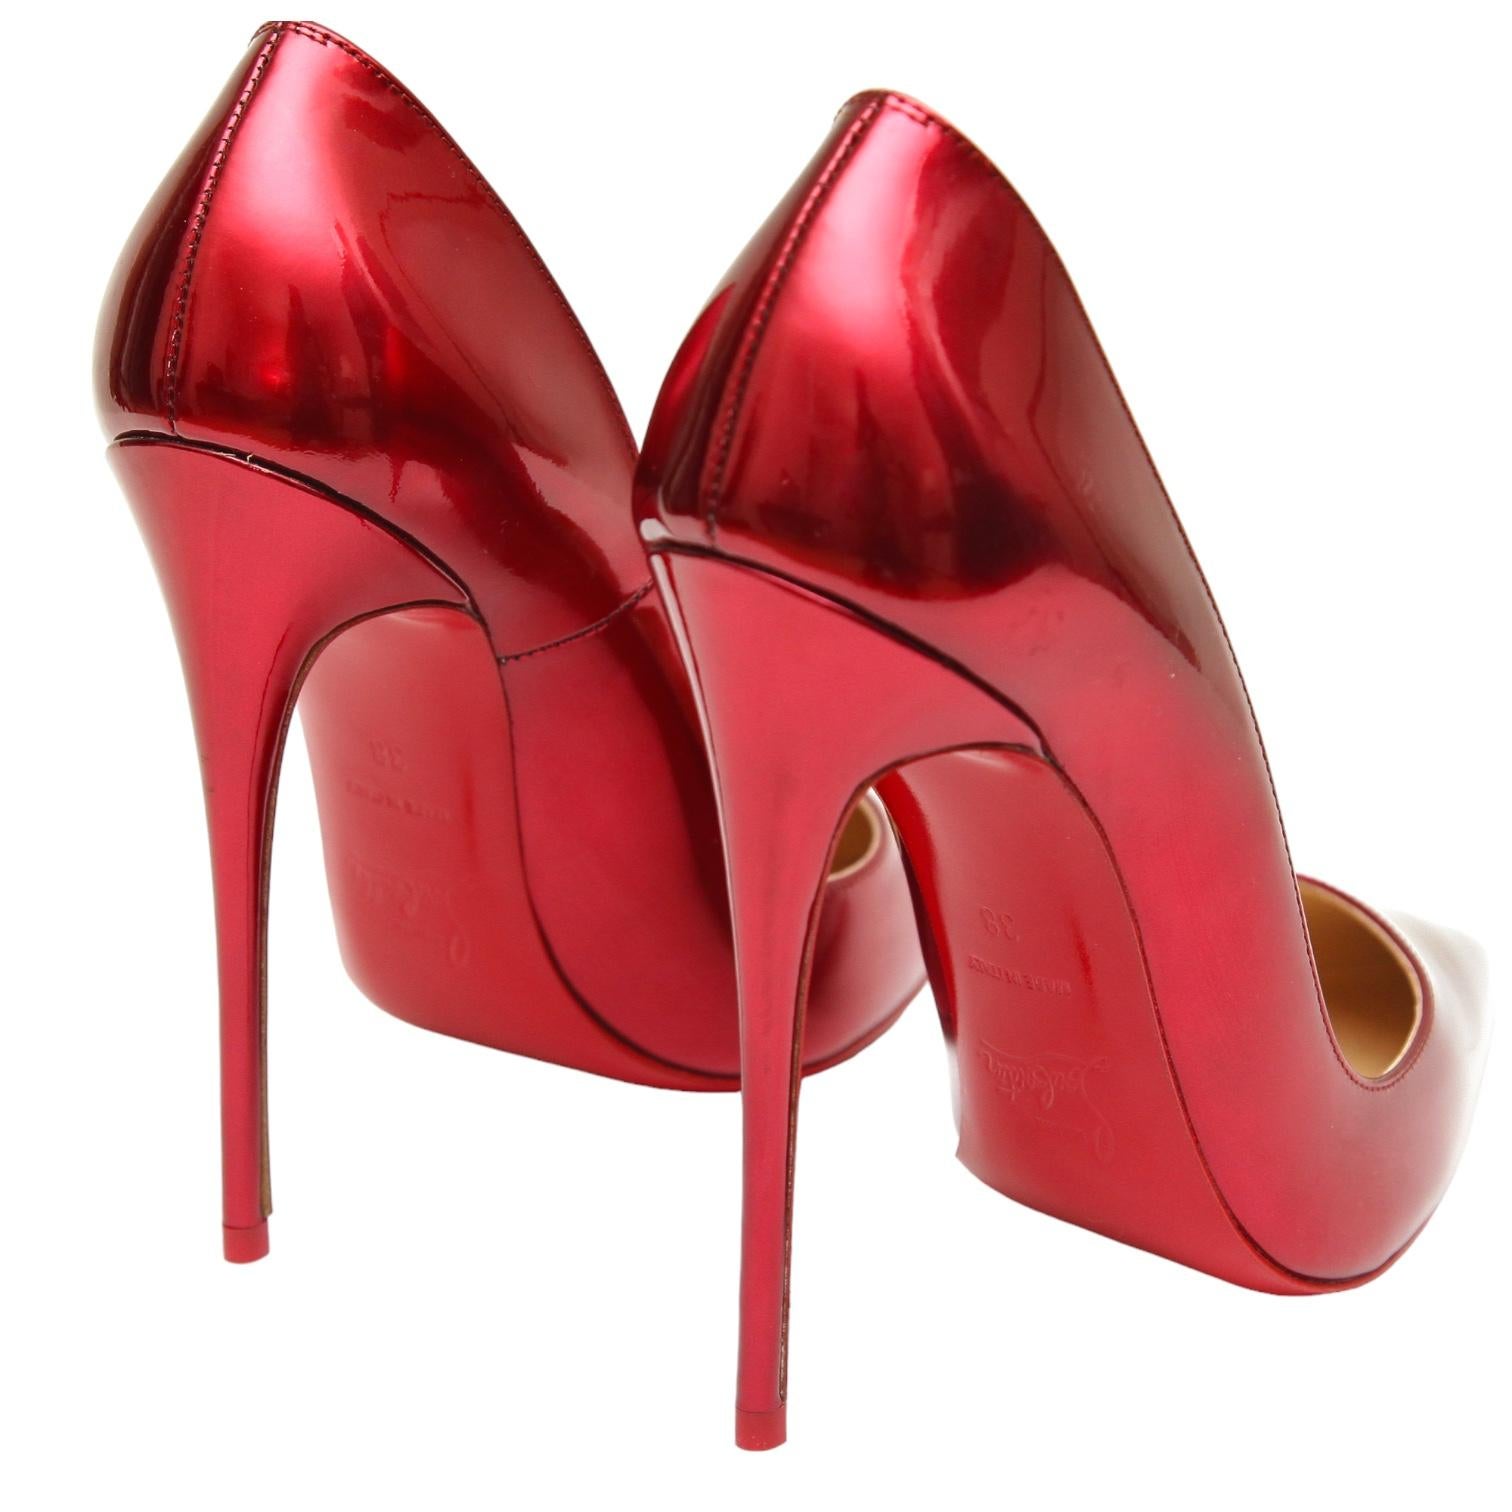 CHRISTIAN LOUBOUTIN So Kate 120 Red Patent Leather Pump Pointed Toe 38 4